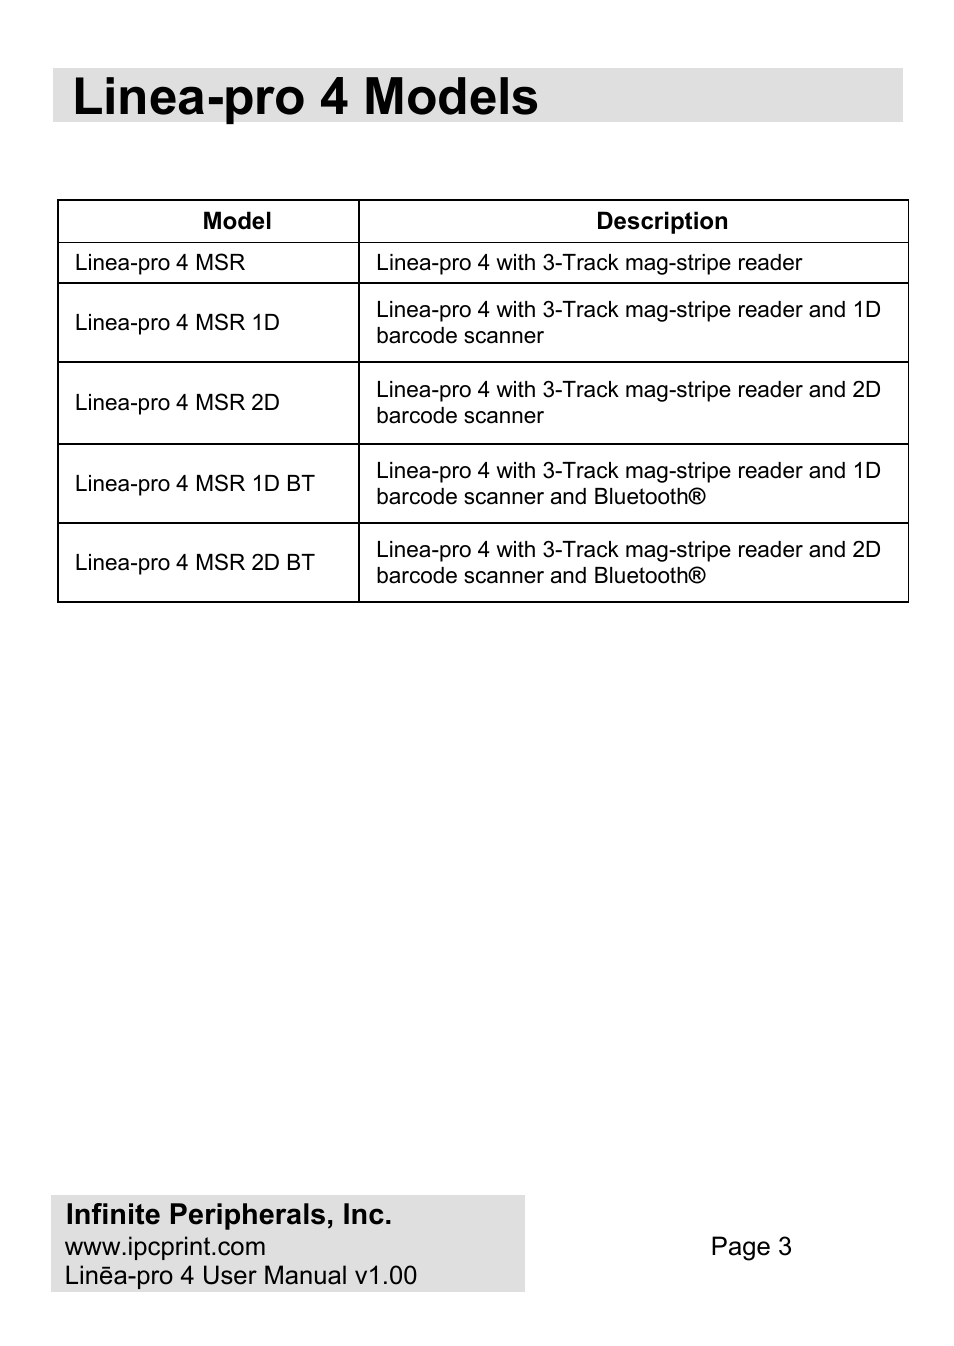 Linea-pro 4 models | Infinite Peripherals PRO 4 User Manual | Page 3 / 24